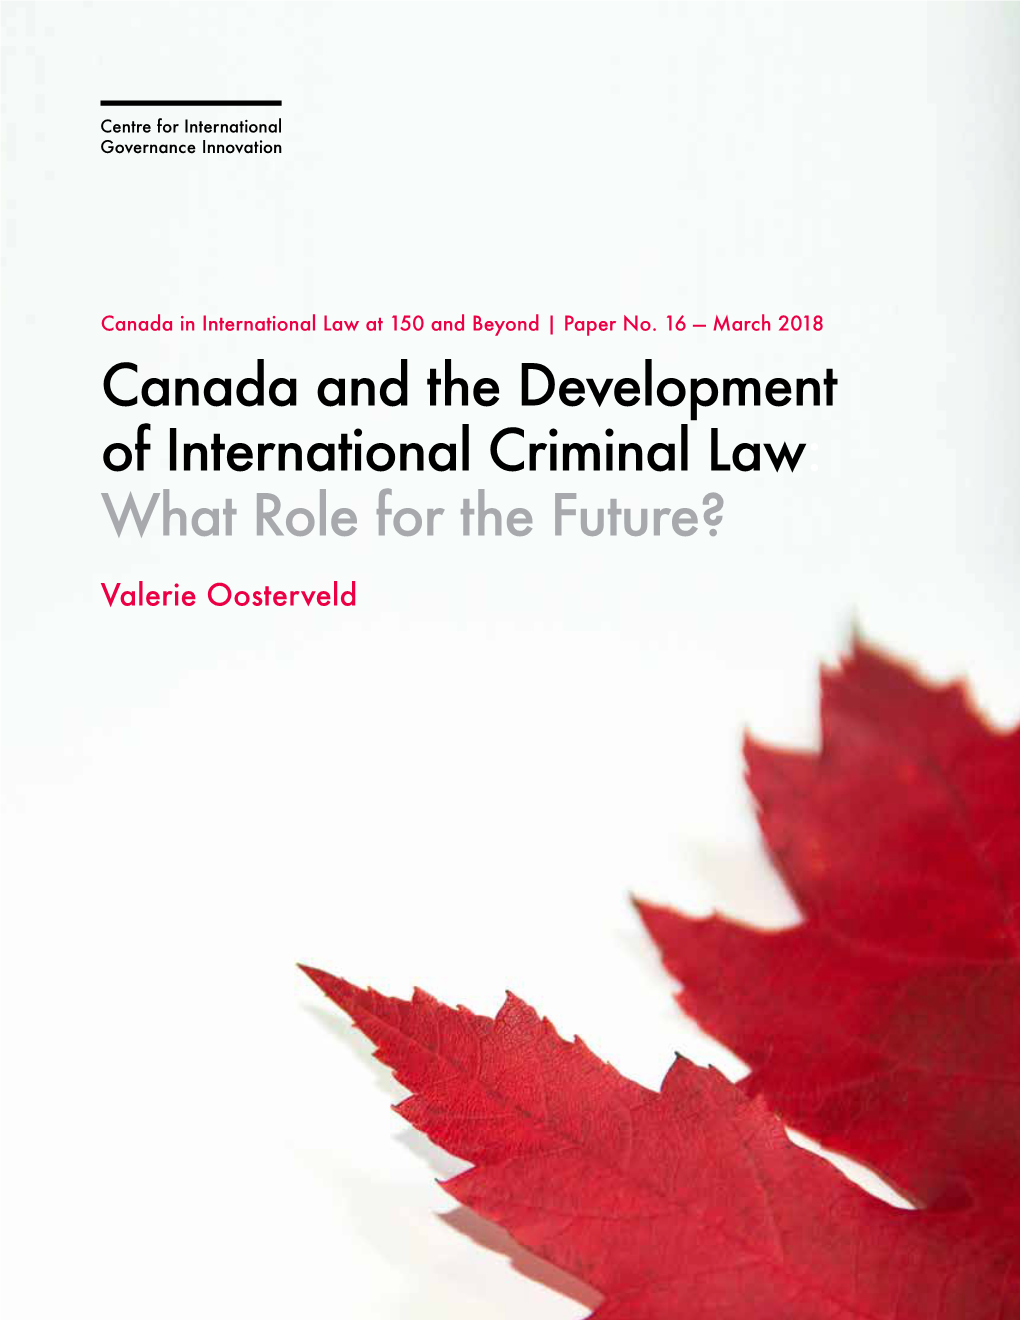 Canada and the Development of International Criminal Law: What Role for the Future?